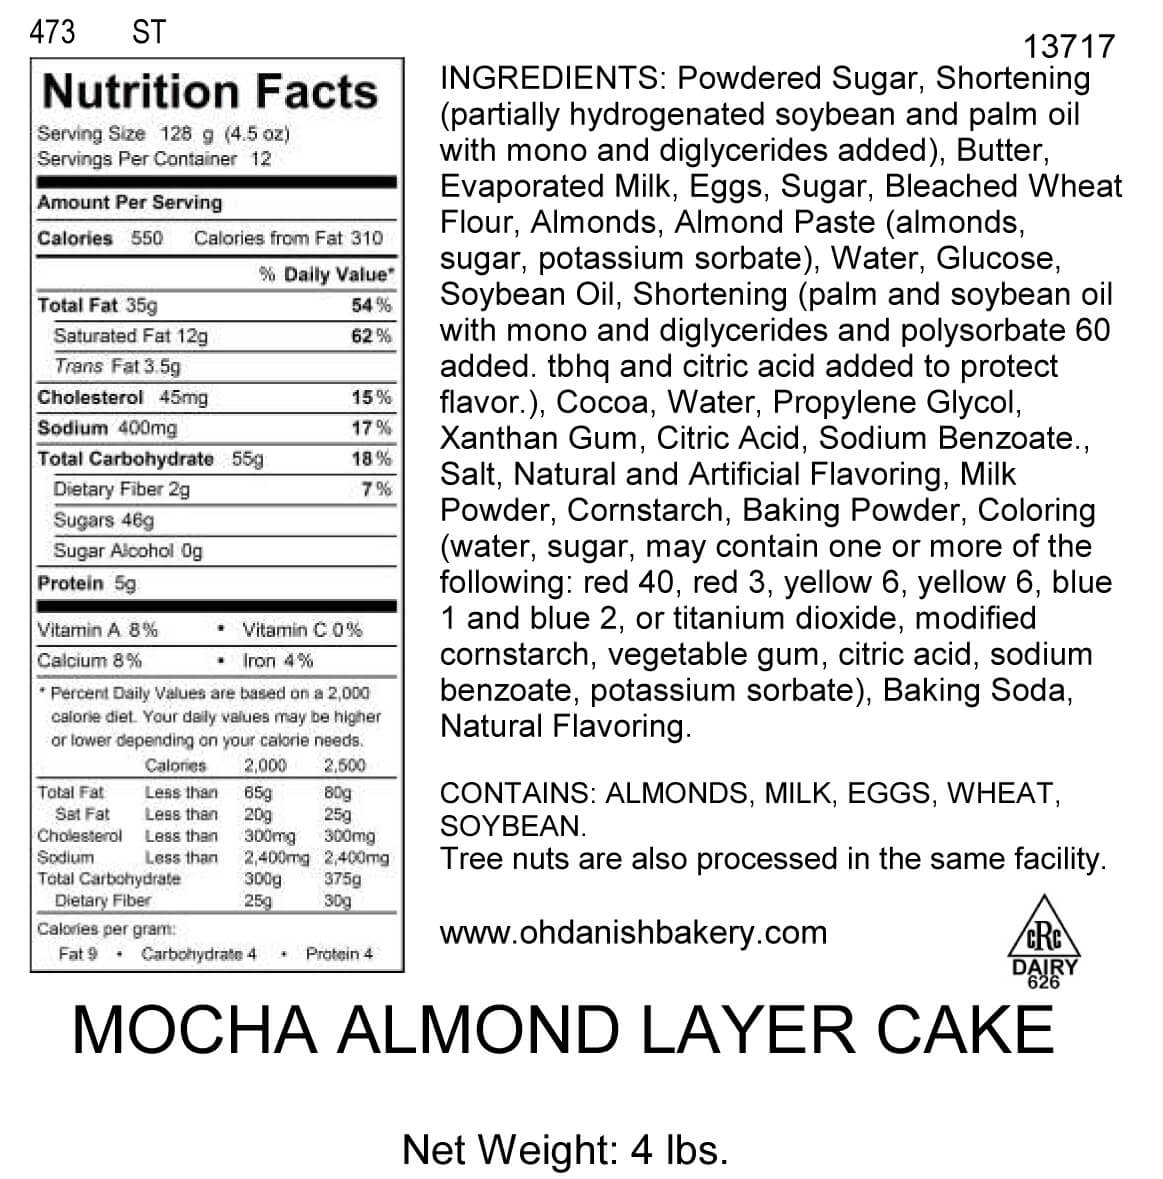 Nutritional Label for Mocha Almond Layer Cake